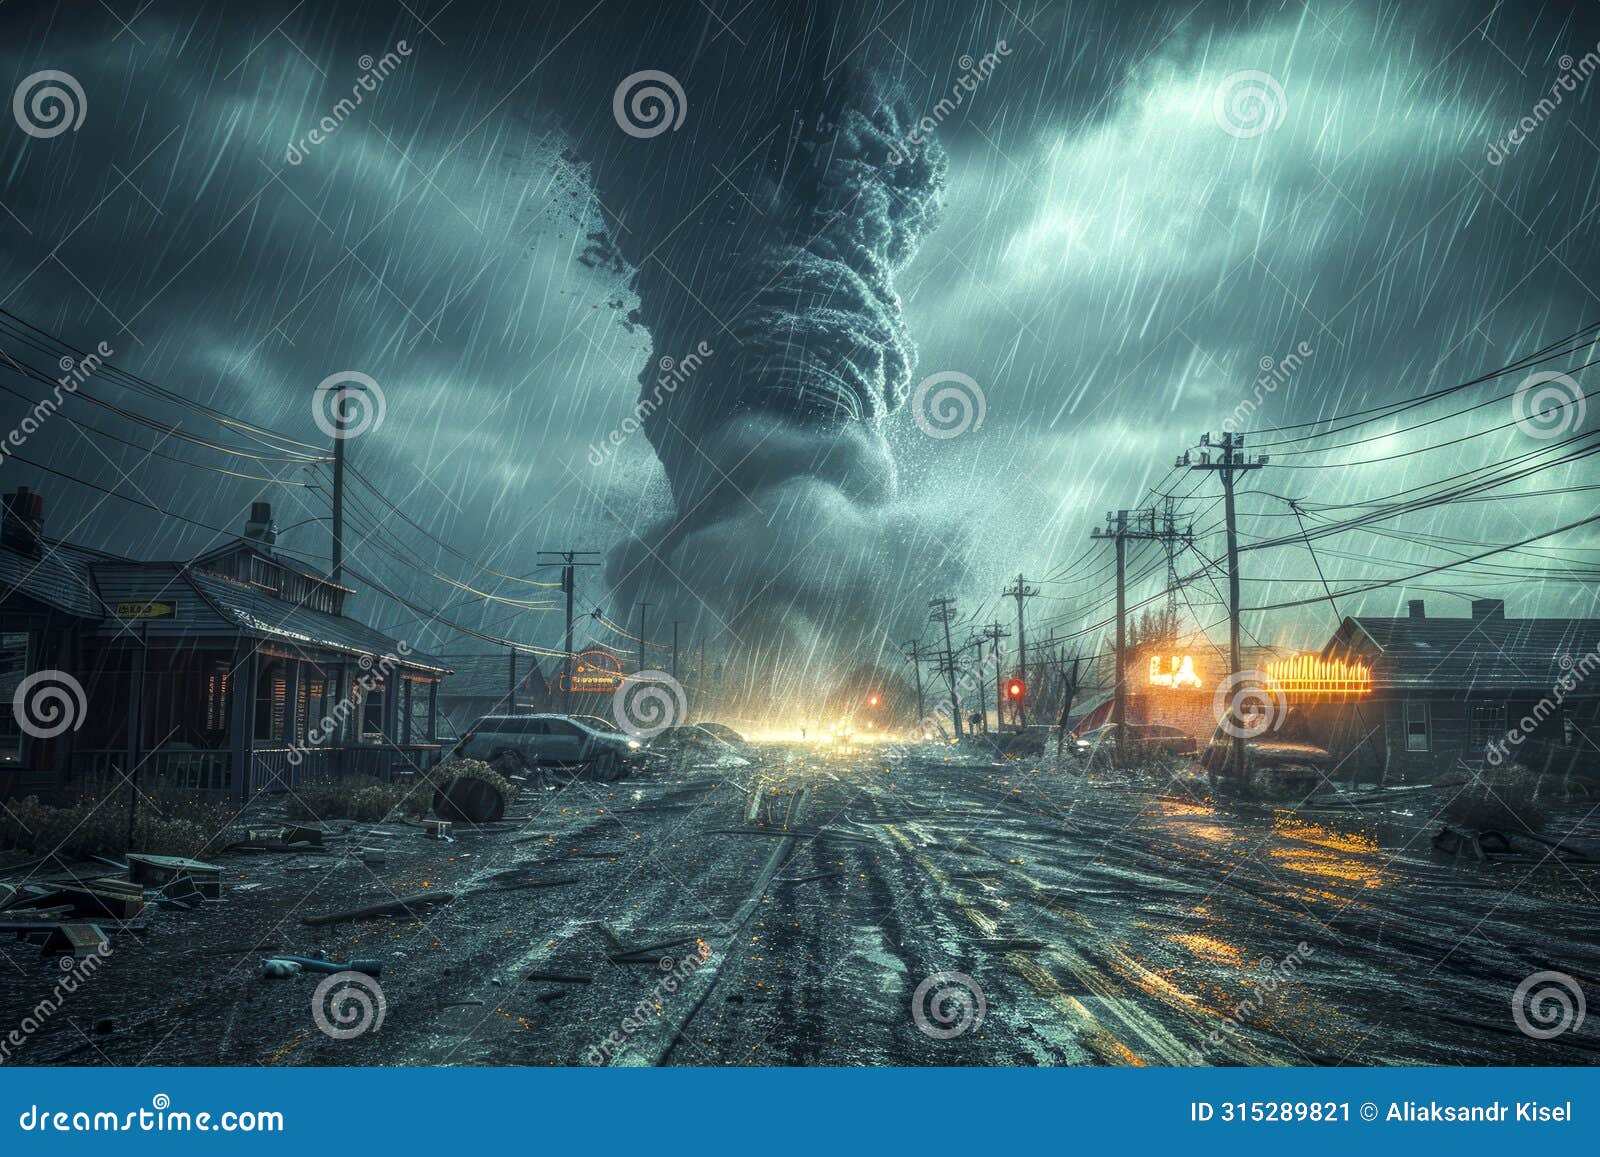 a menacing tornado looms over residential homes in a small town, its dark funnel cloud casting a shadow of fear. a